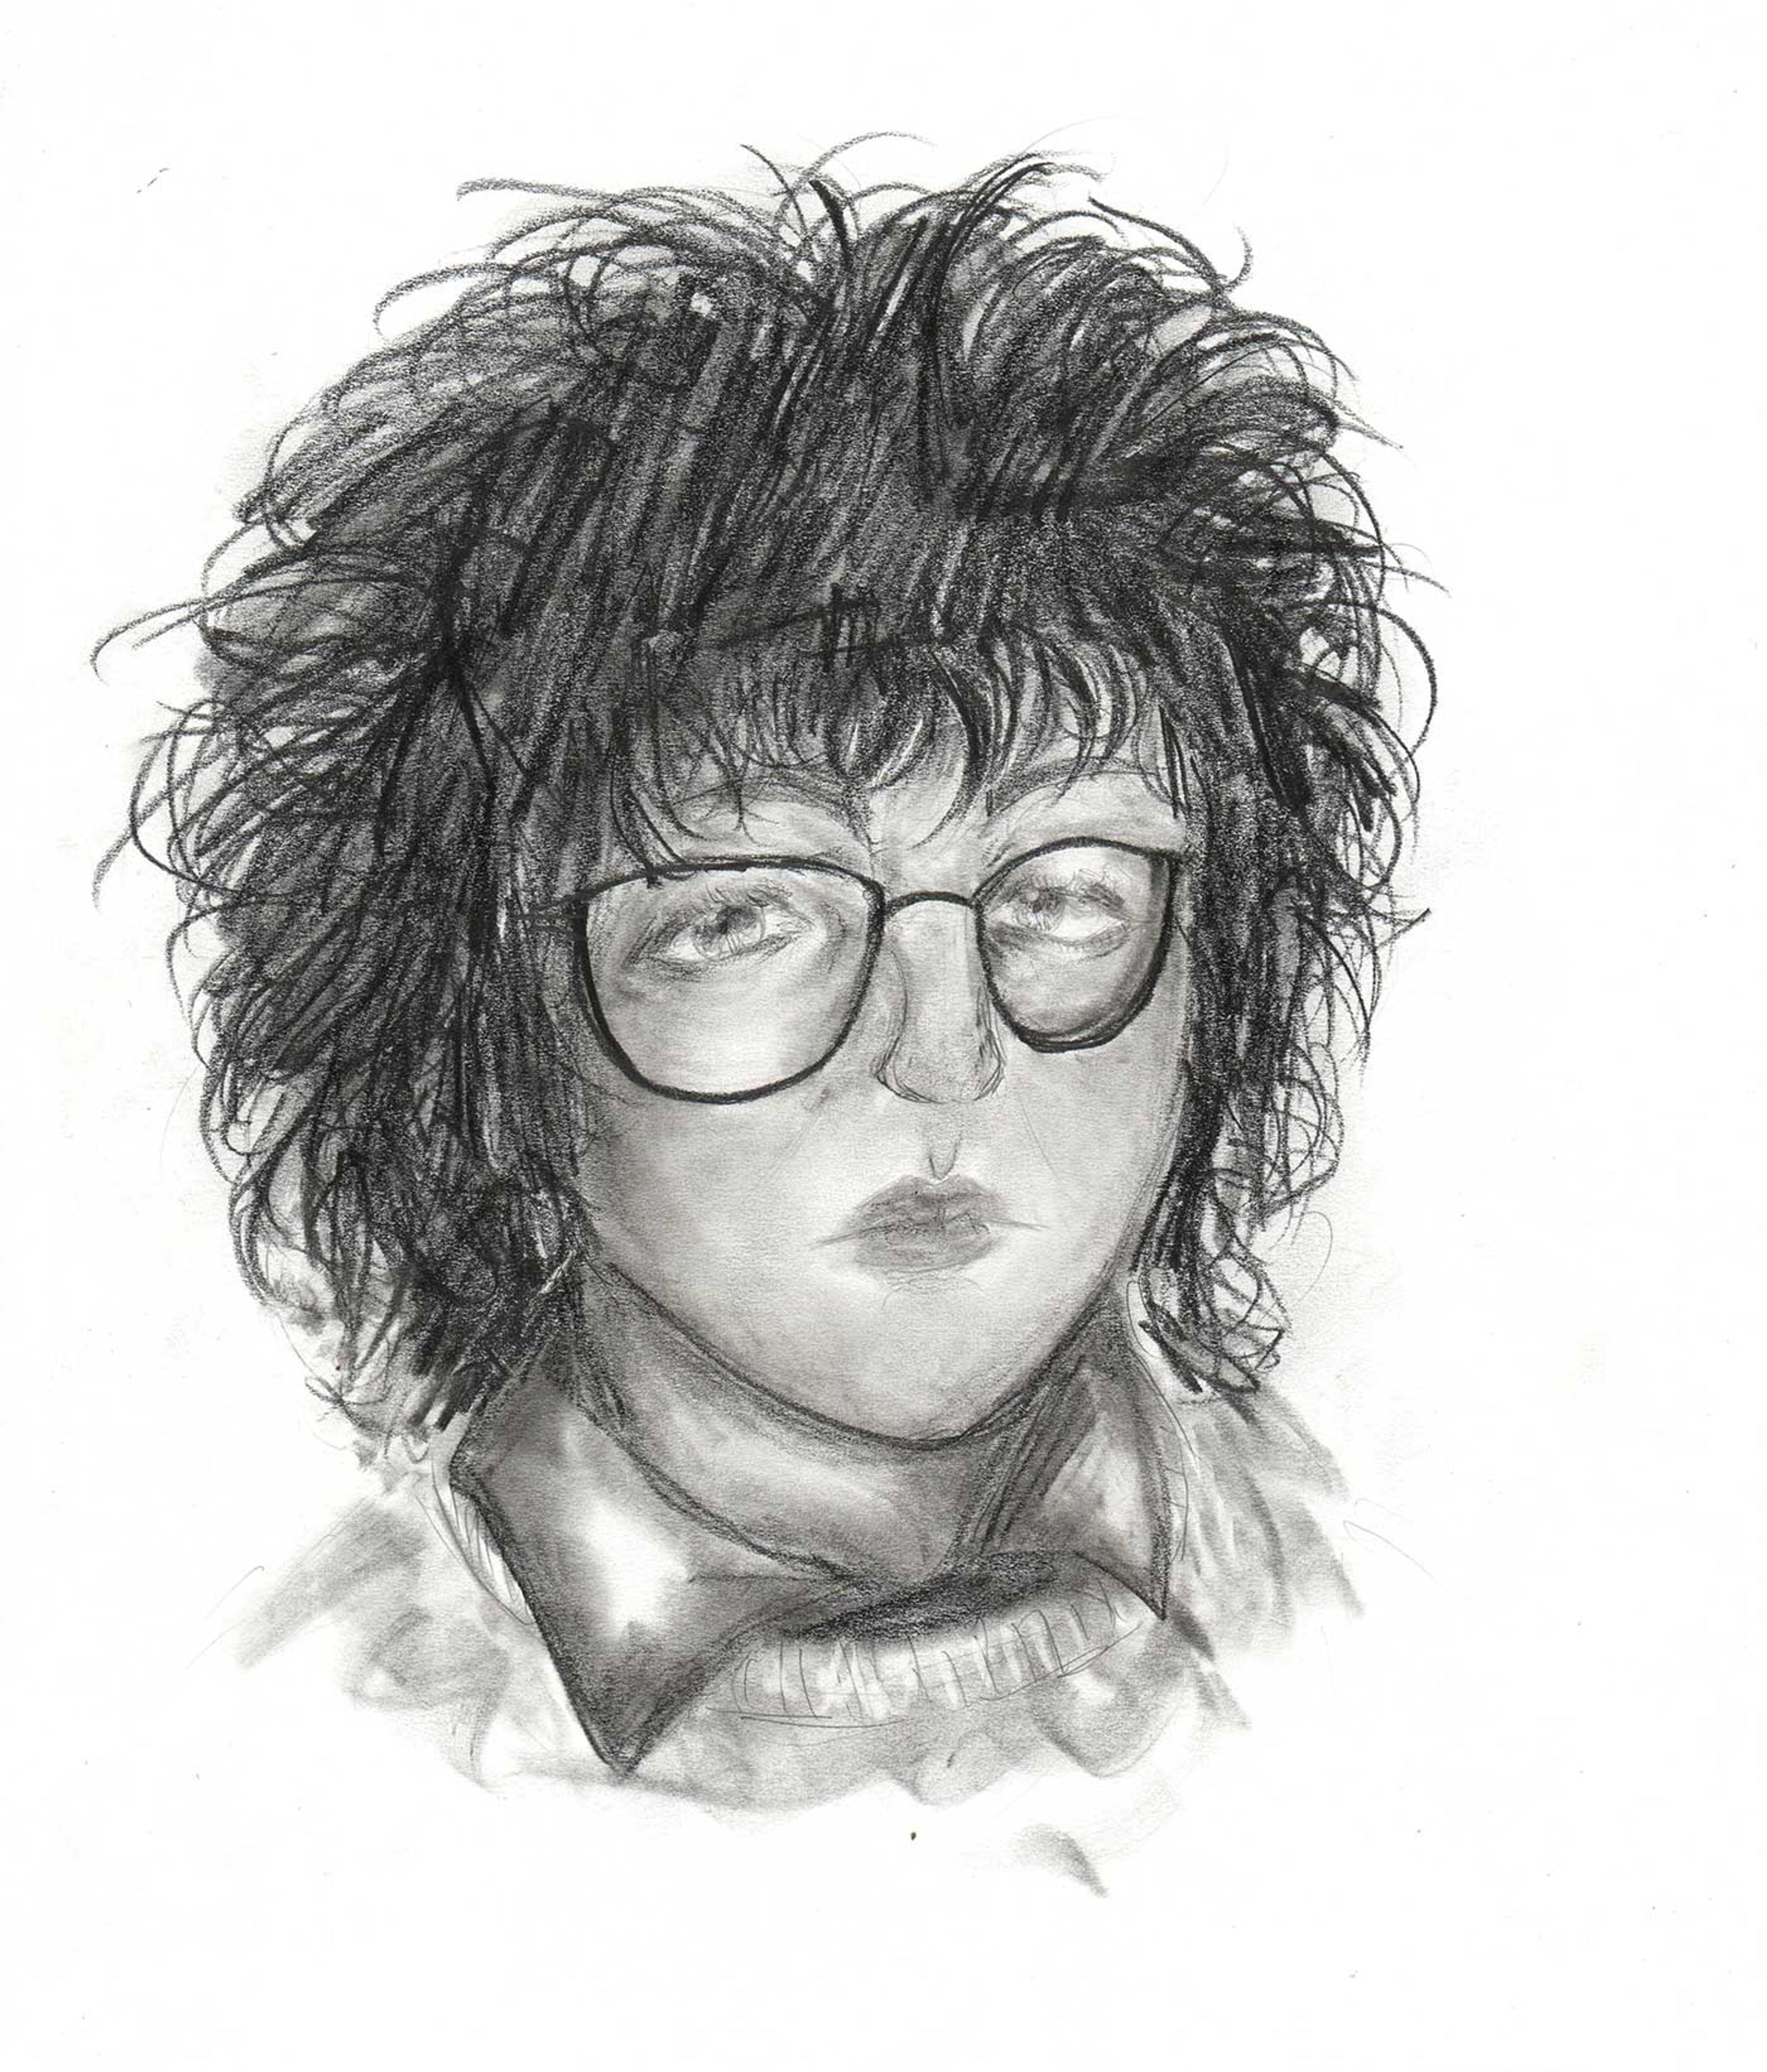 Charcoal portrait of a young girl with glasses.